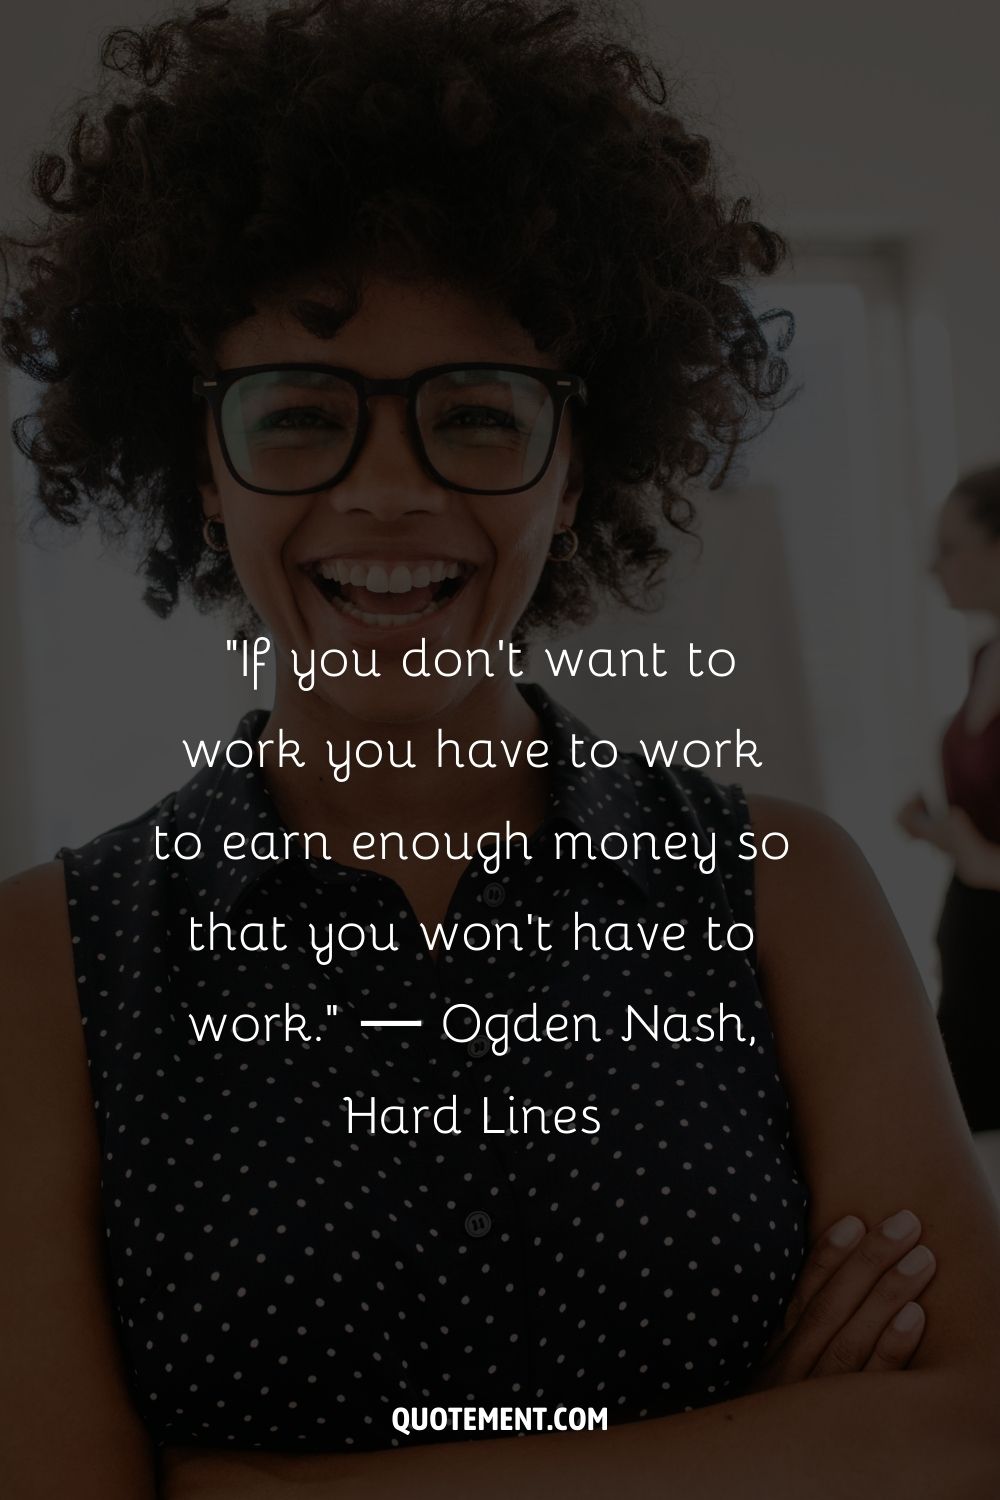 “If you don’t want to work you have to work to earn enough money so that you won’t have to work.” ― Ogden Nash, Hard Lines